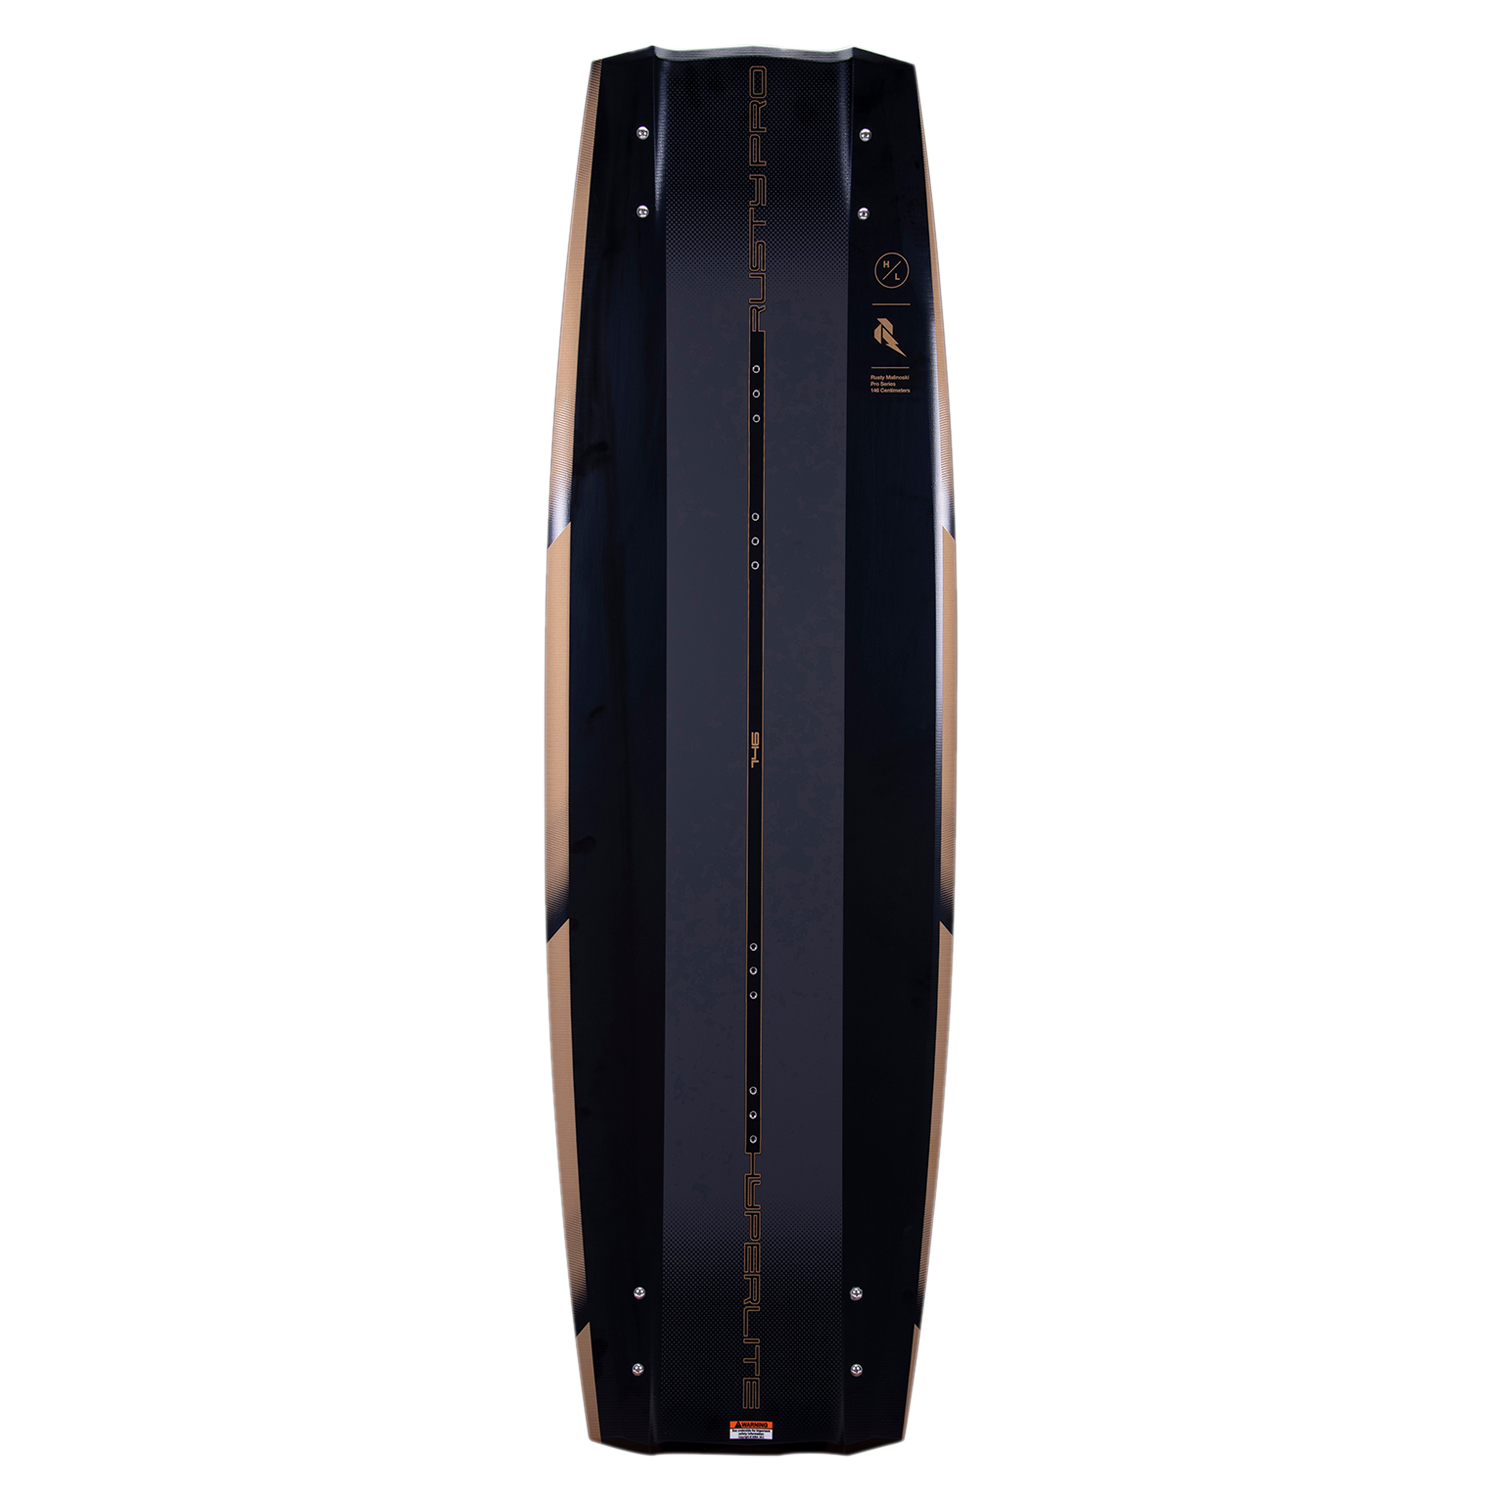 A Hyperlite 2023 Rusty Pro wakeboard with a poppy feel, showcasing its bold black and gold design against a clean white background.